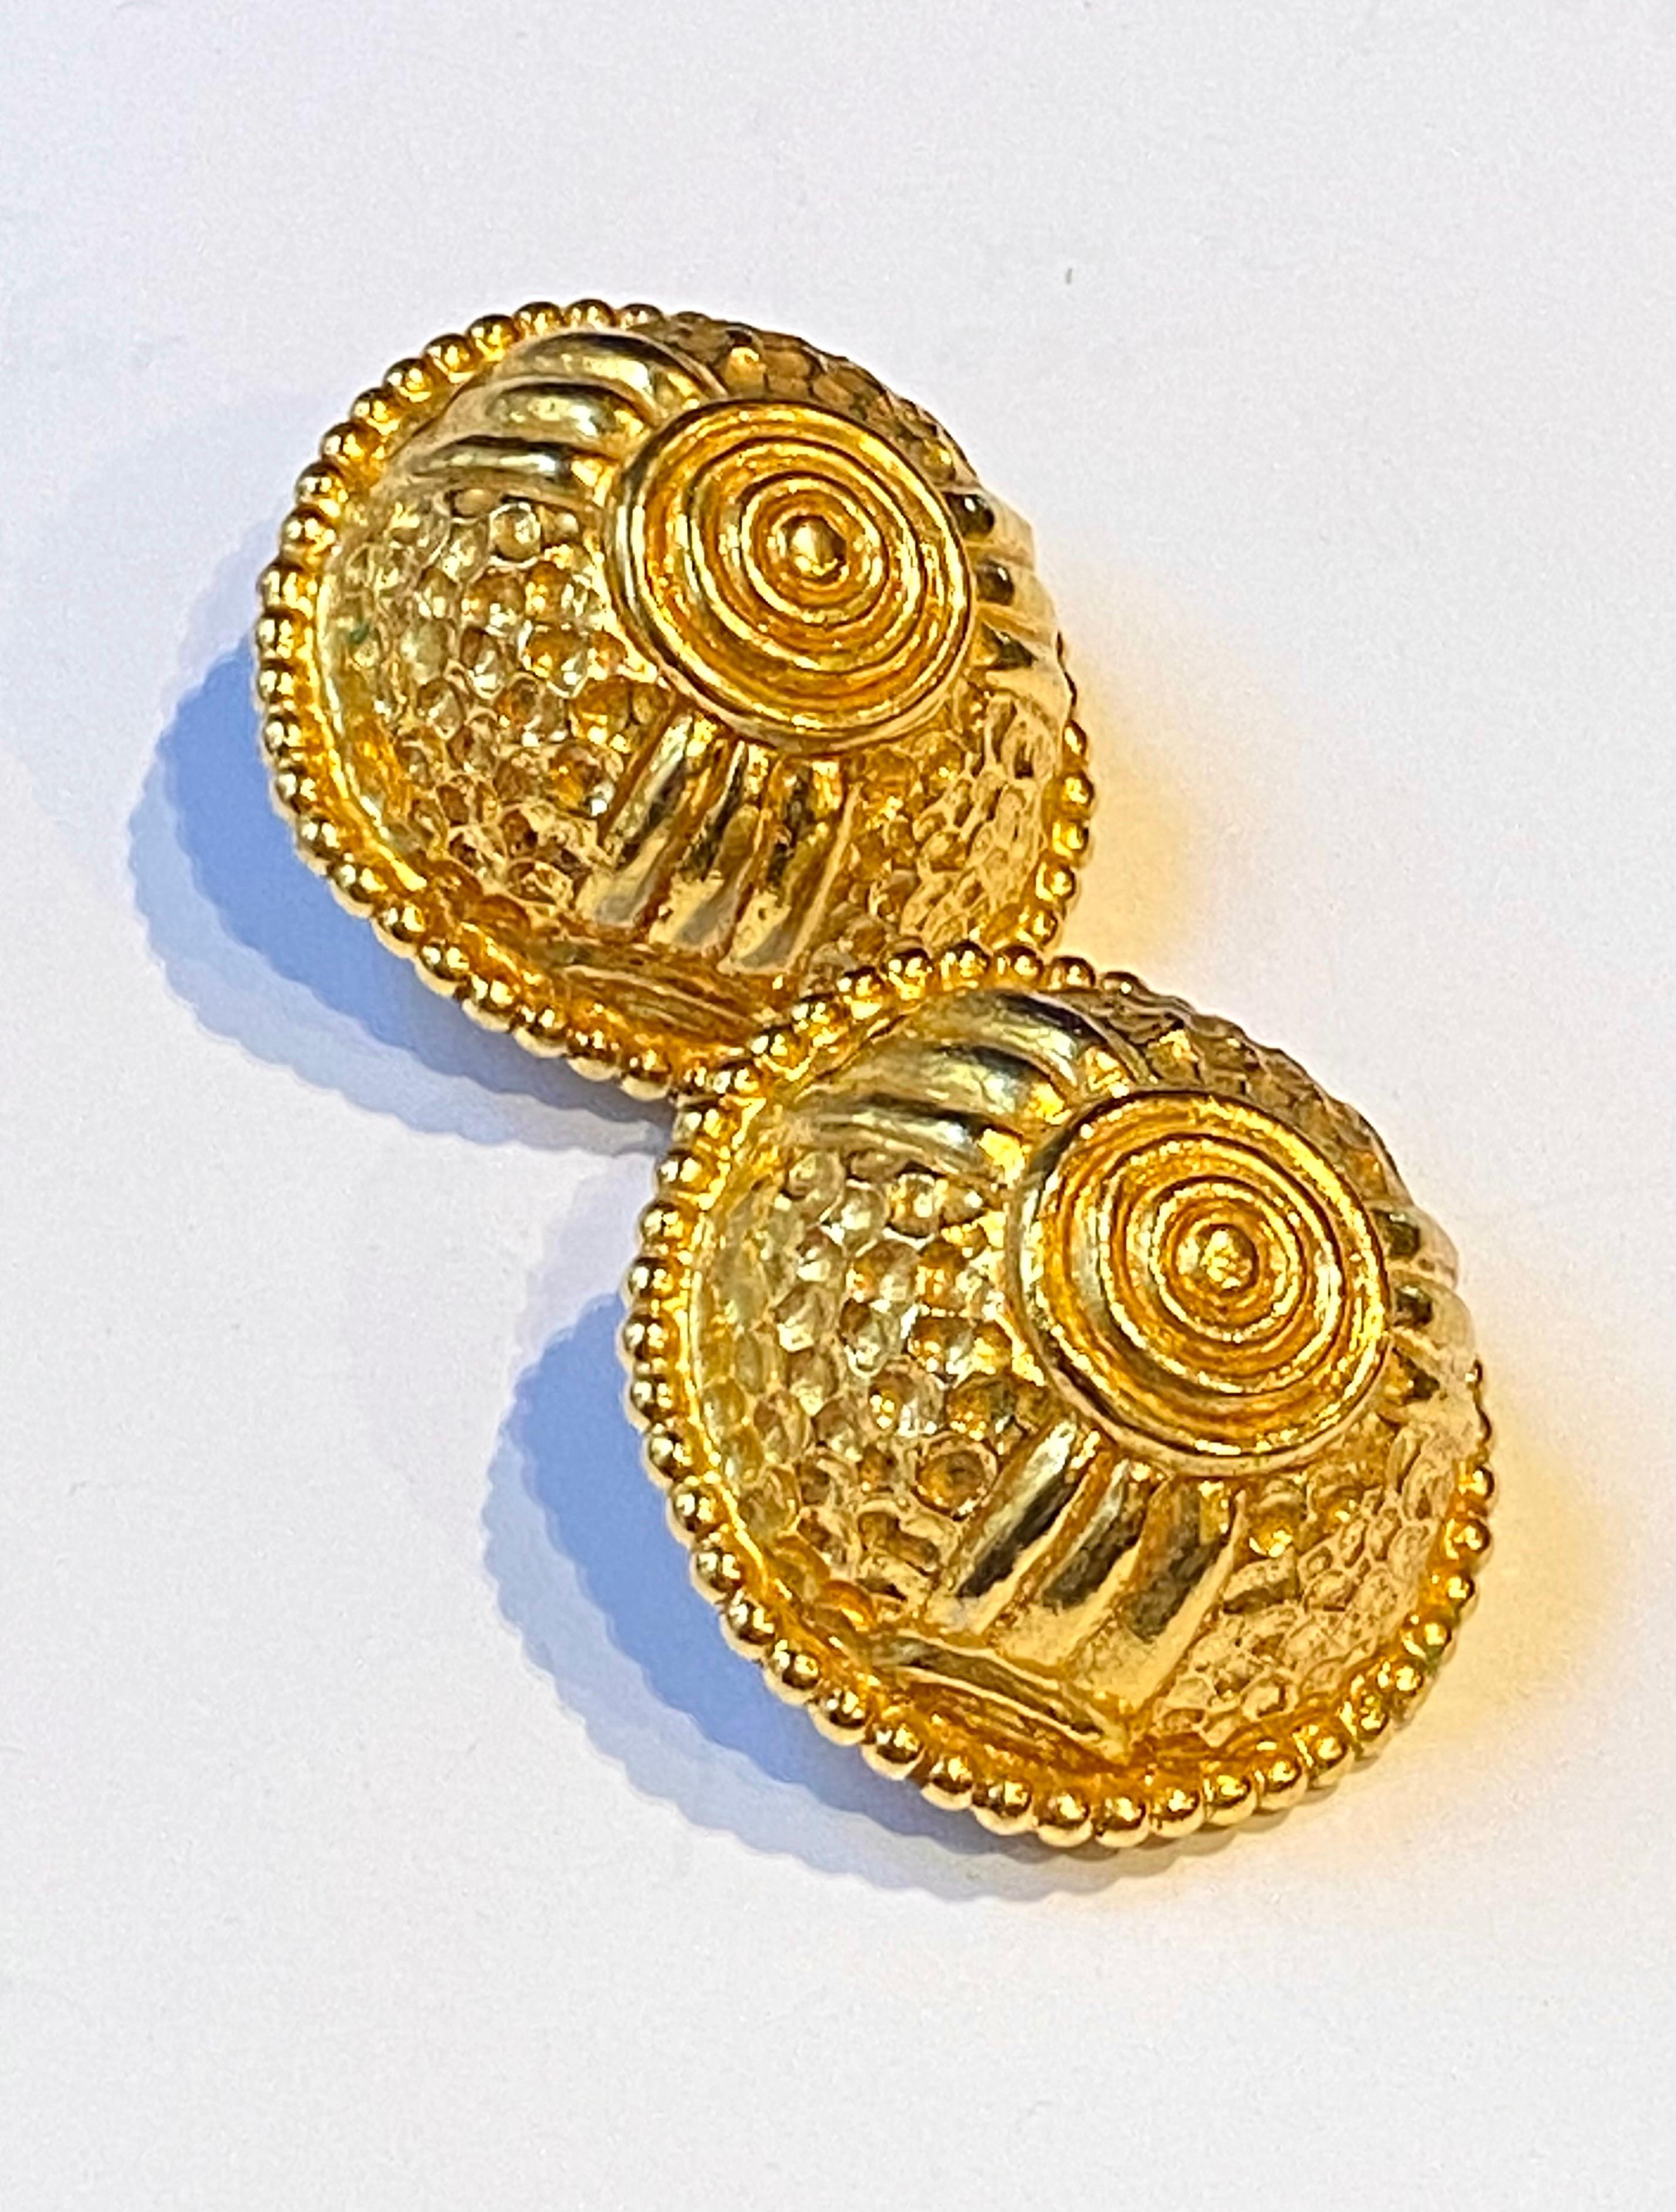 Presented is an amazing pair of 1980s large domed button earrings by French designer Dominique Aurientis. Beautifully cast and richly plated in 18K gold, the earrings nod to the Etruscan style. The earrings are intentionally irregular in its round